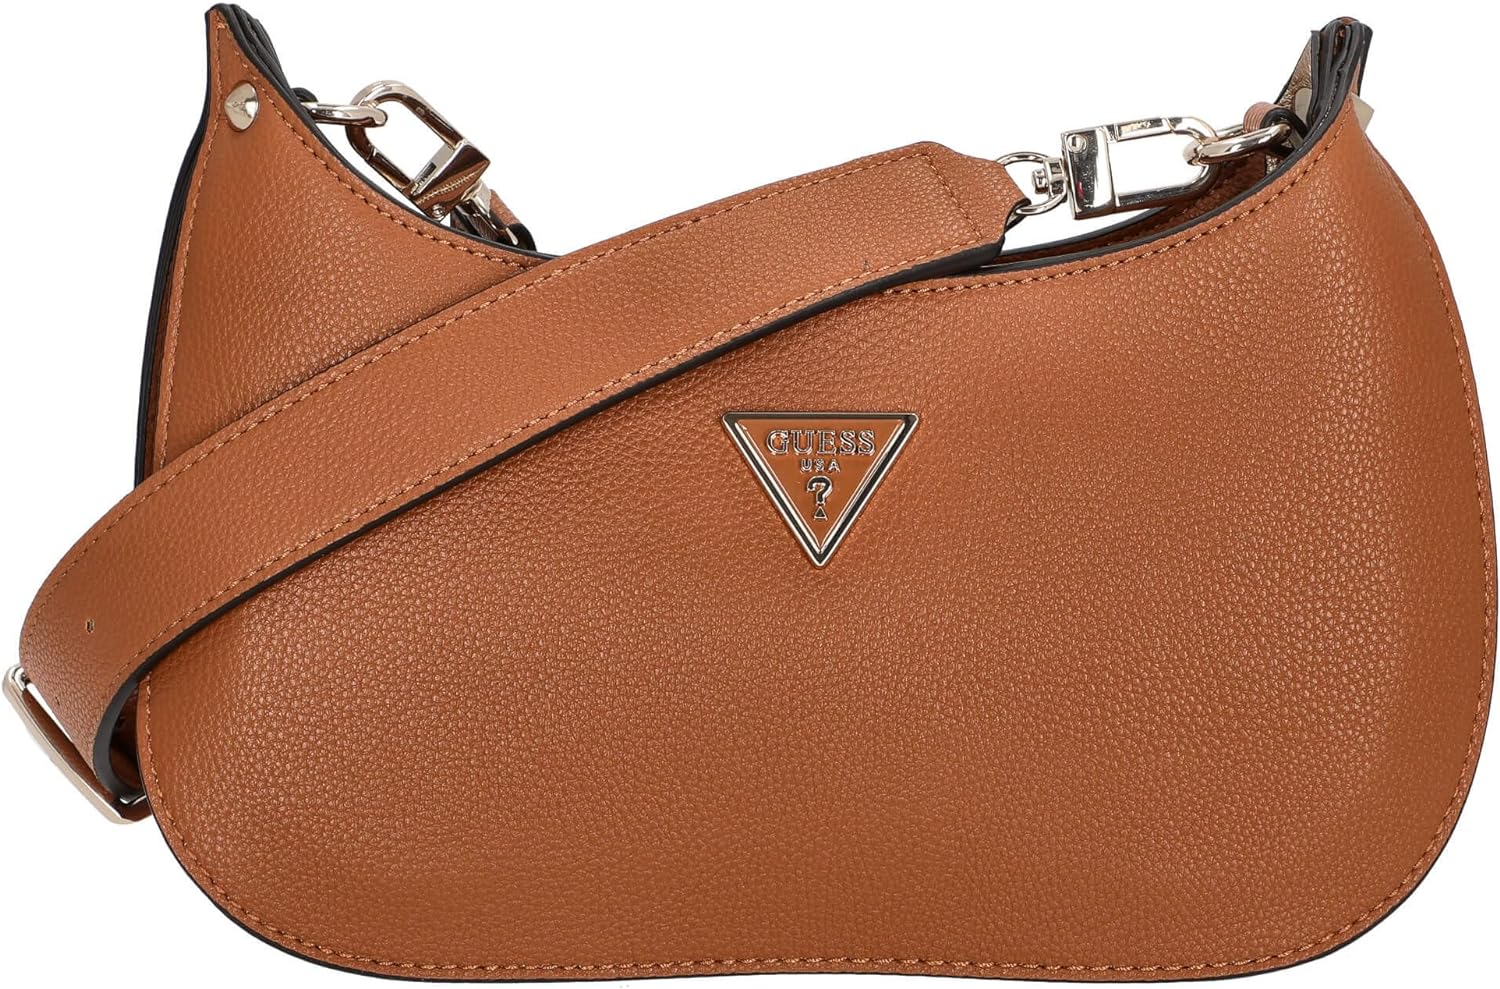 Tracollina Guess Donna Cognac